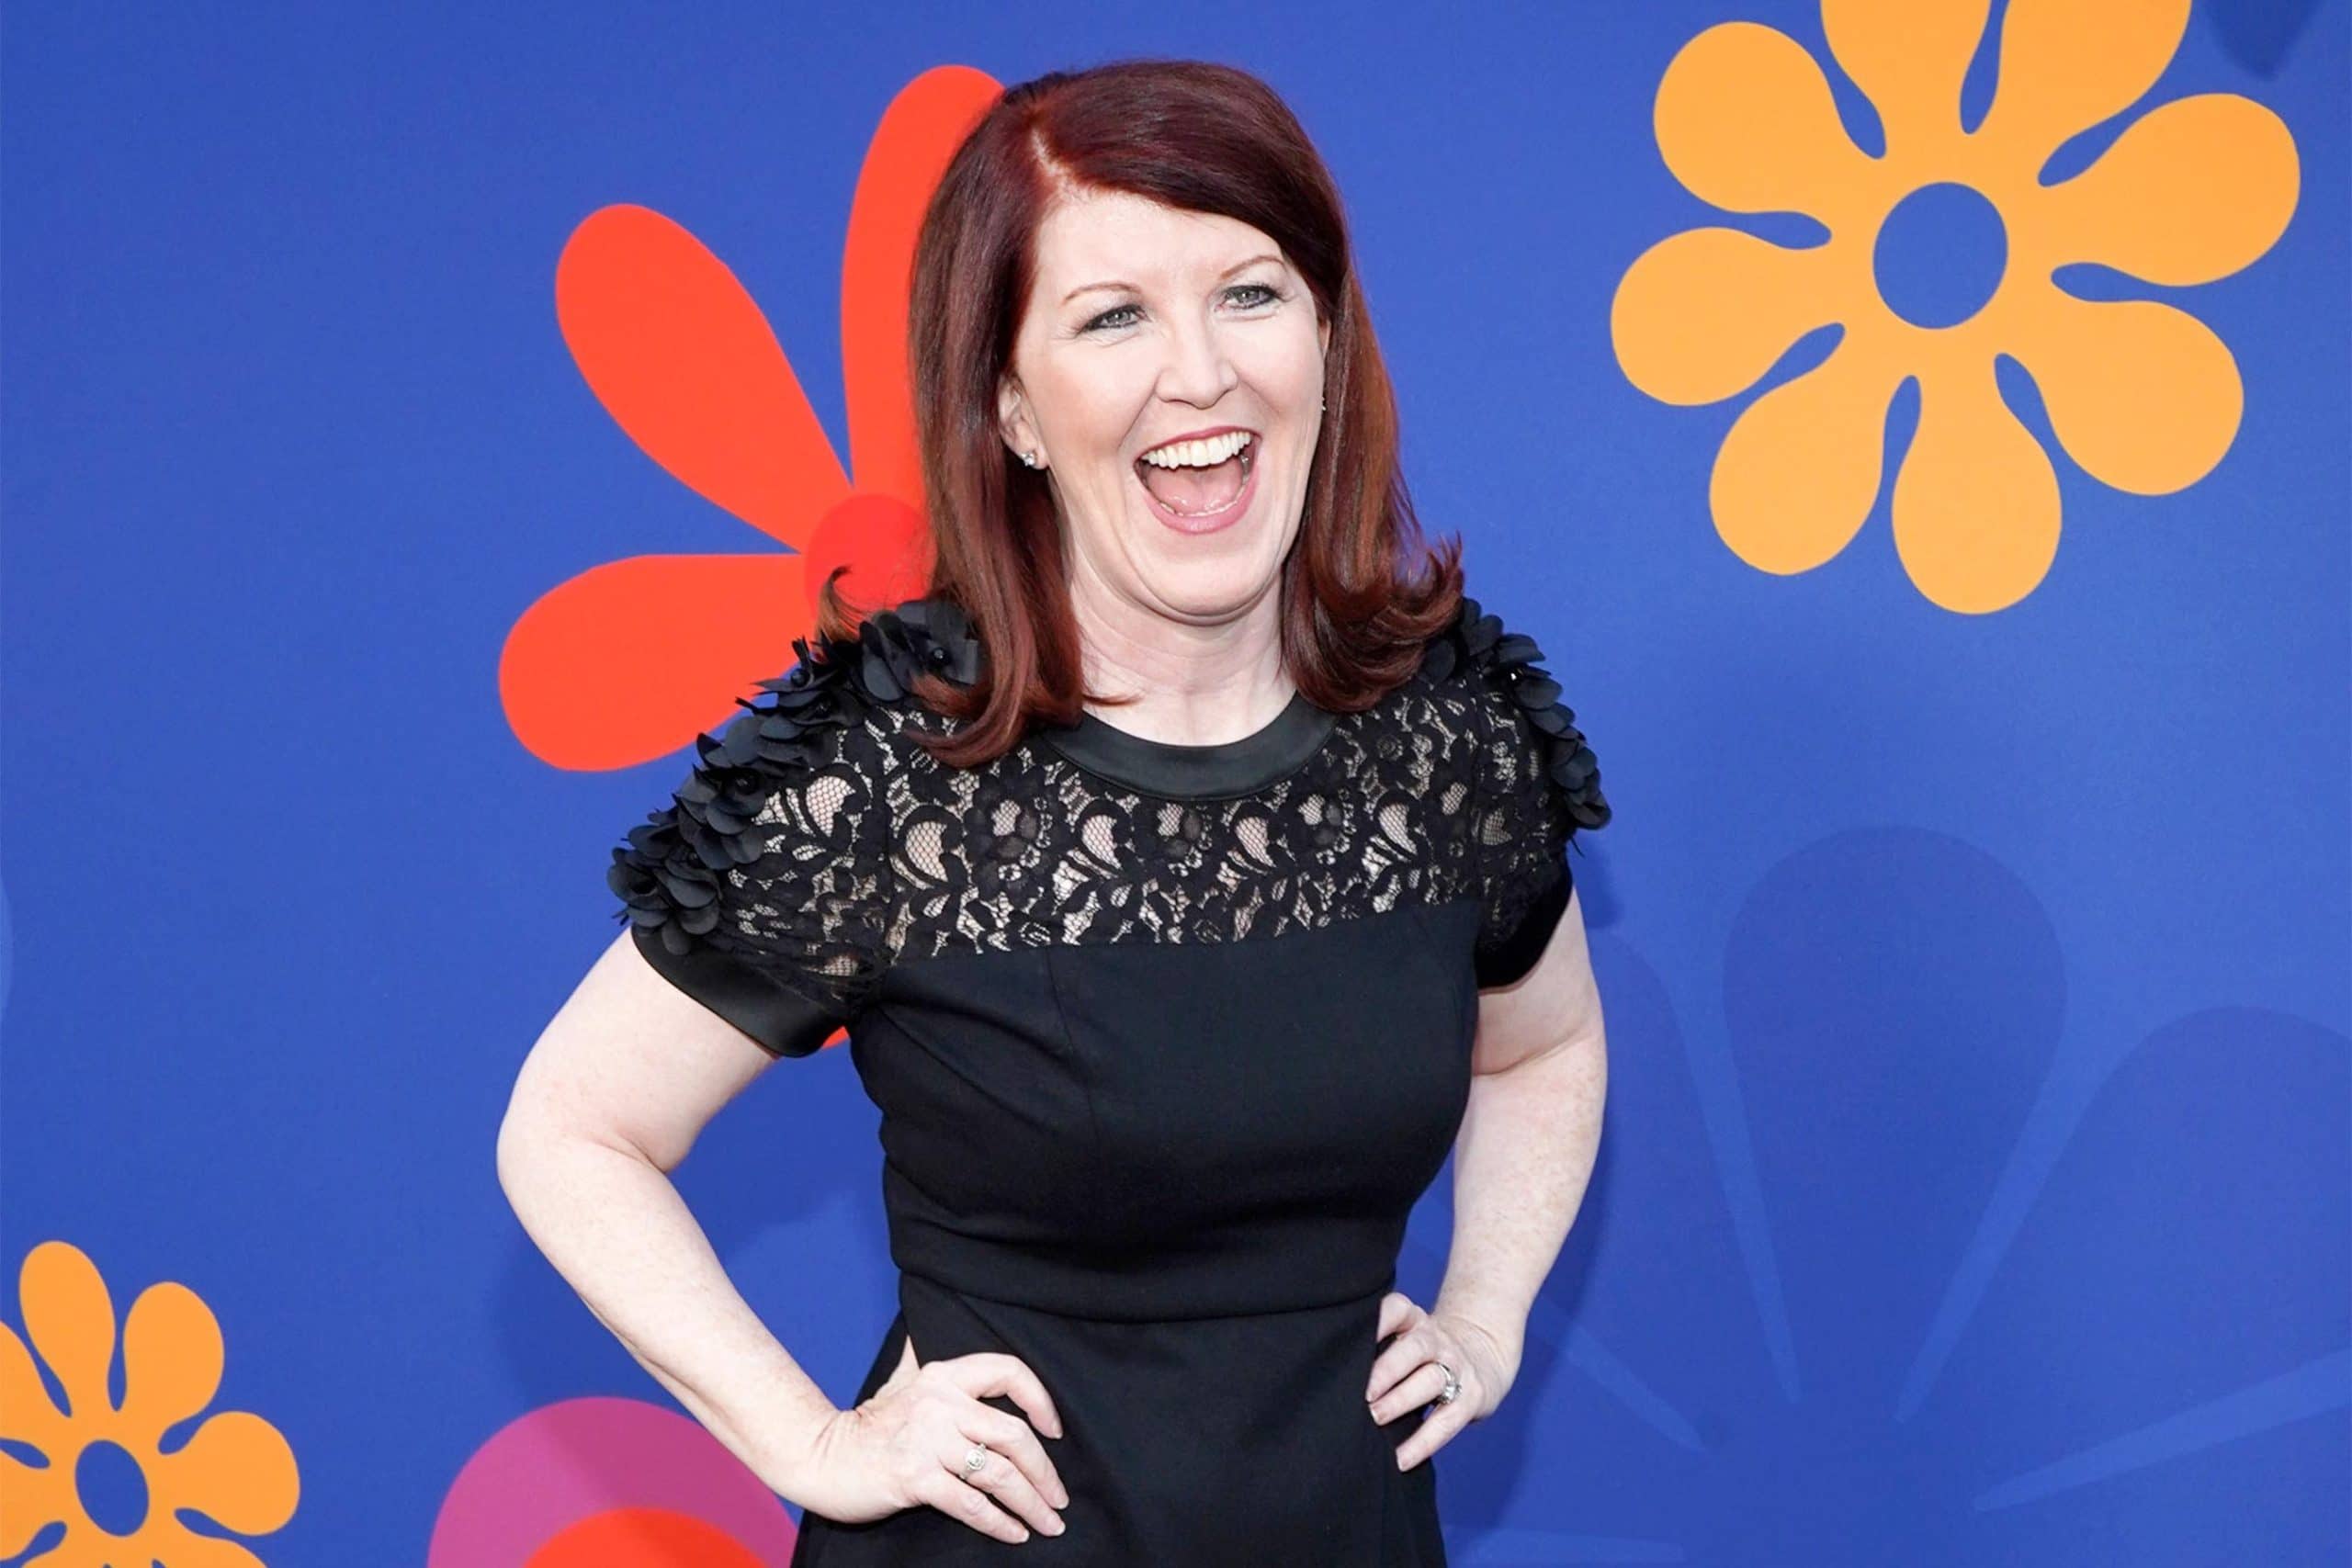 Kate Flannery Body Measurement, Bra Sizes, Height, Weight Celeb Now 2021